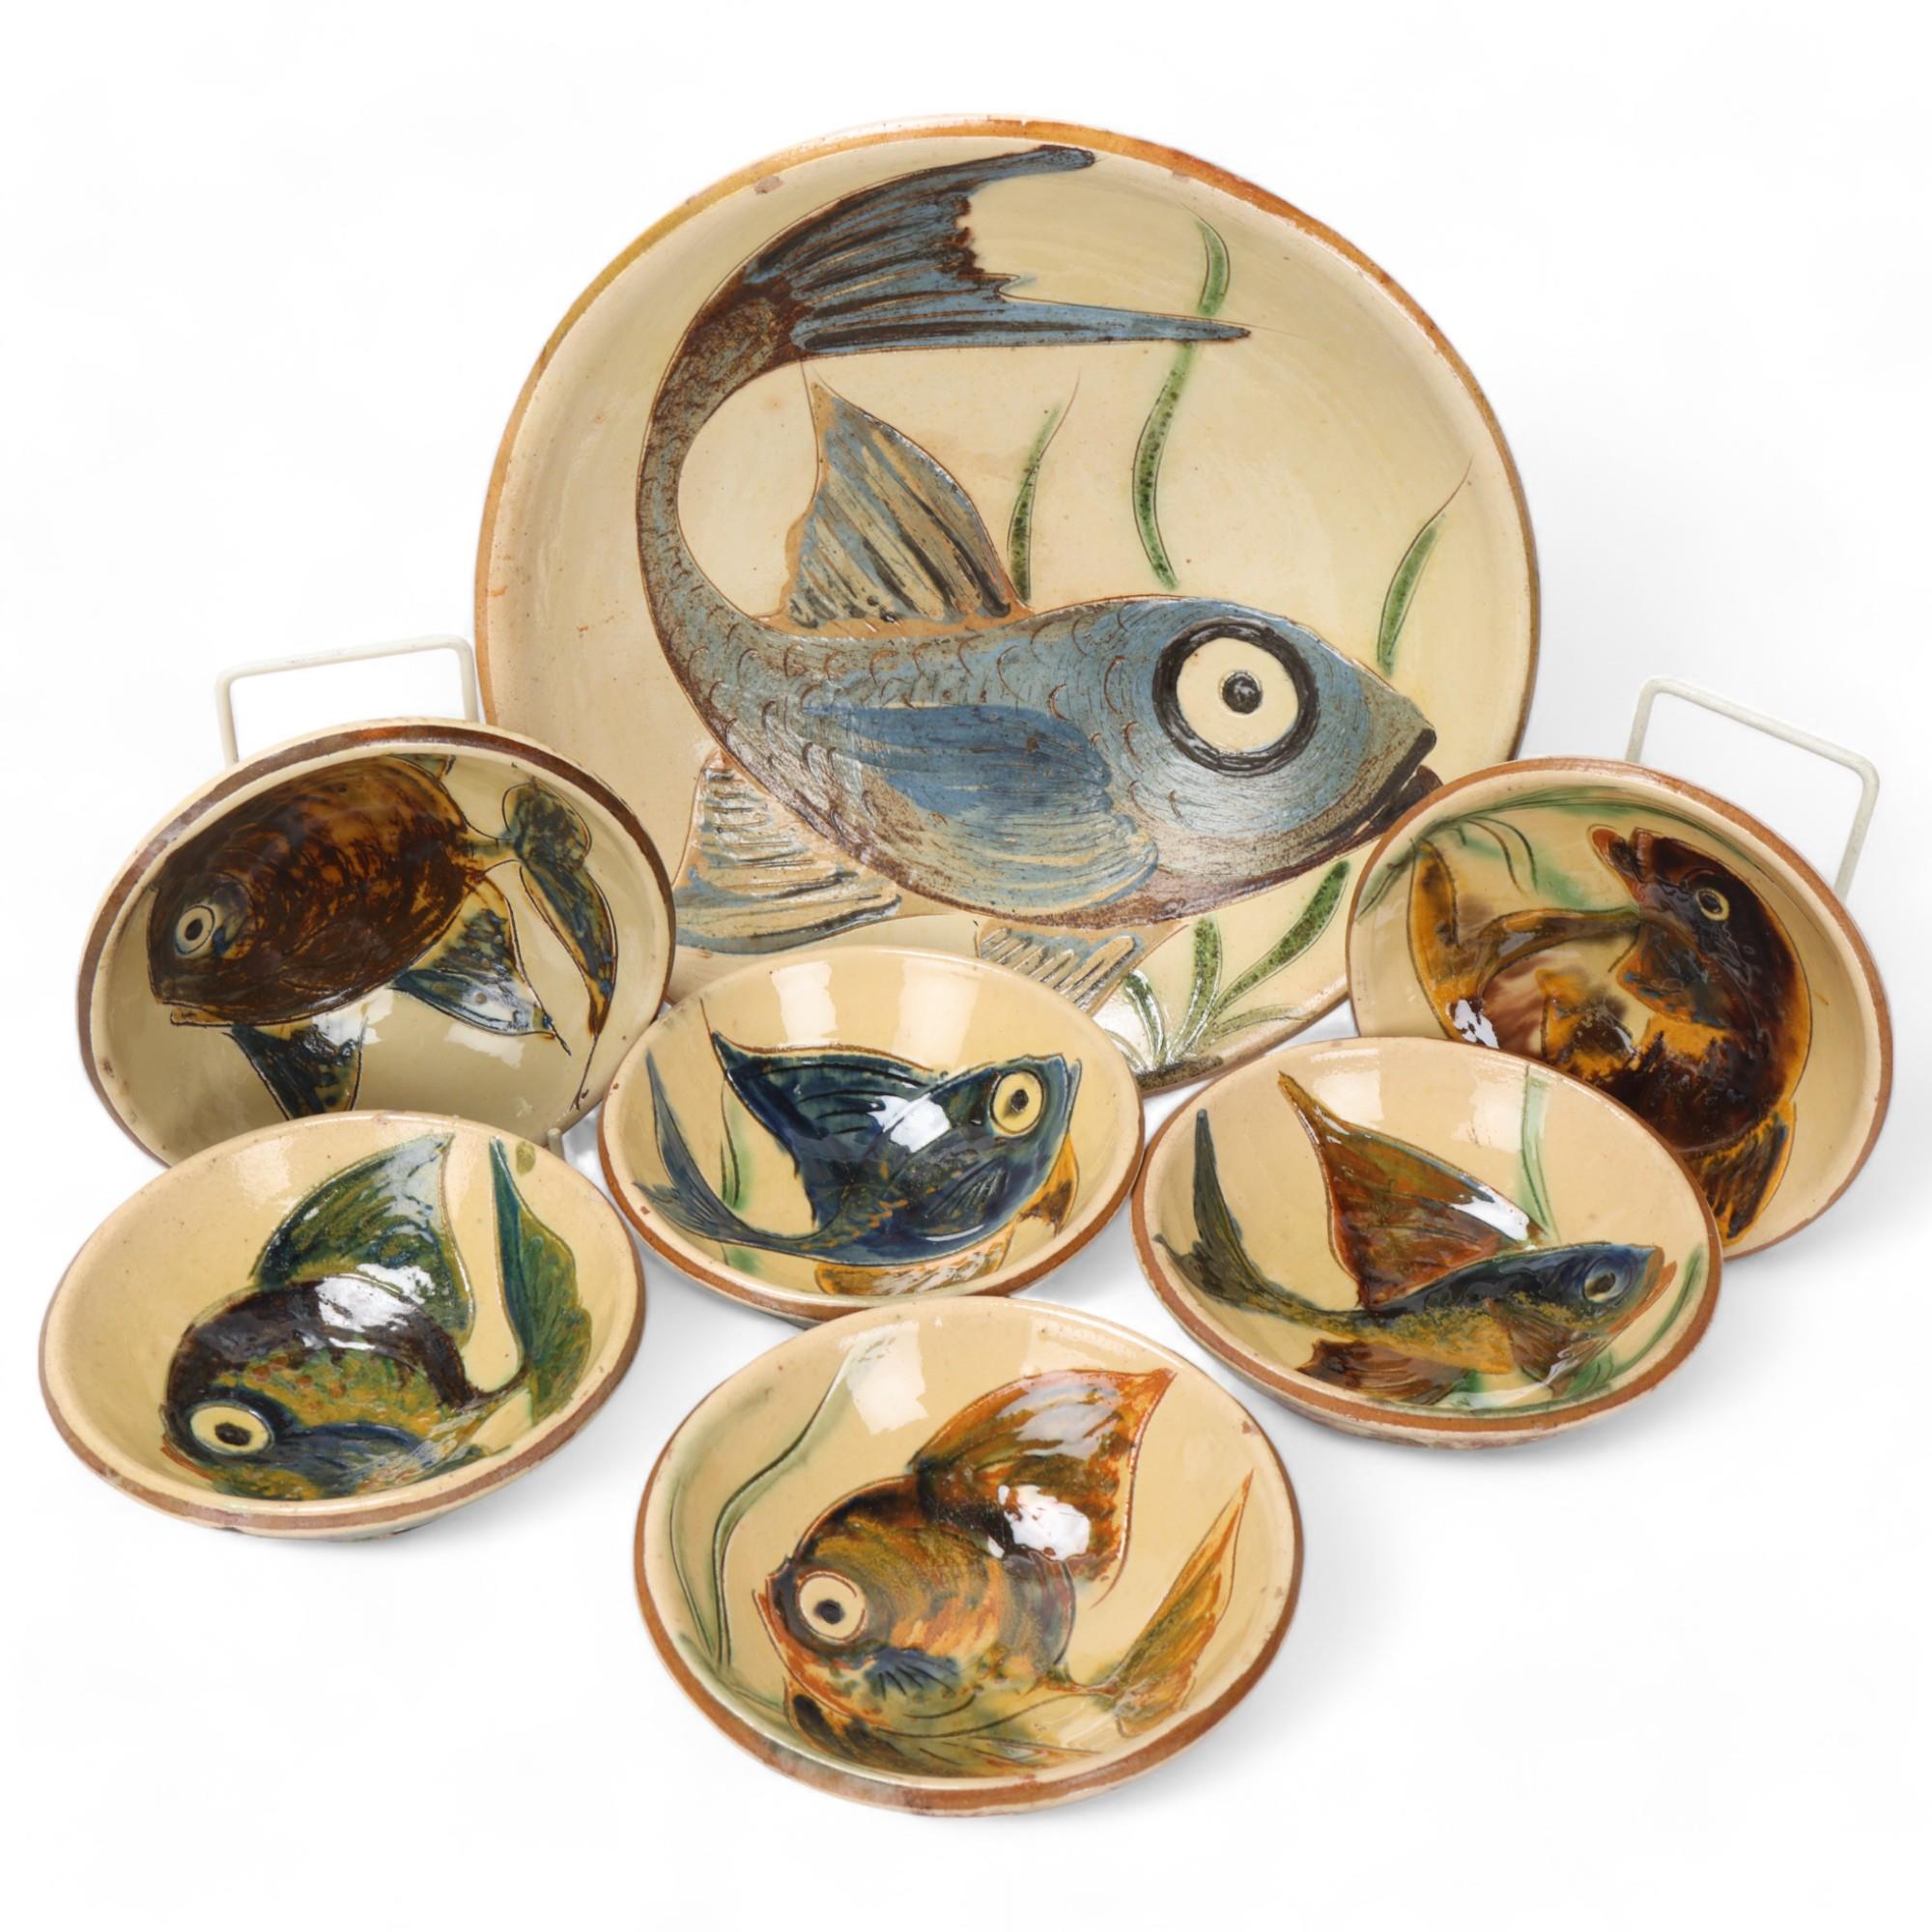 A large earthenware bowl with slipware fish decoration, together with six smaller bowls by the